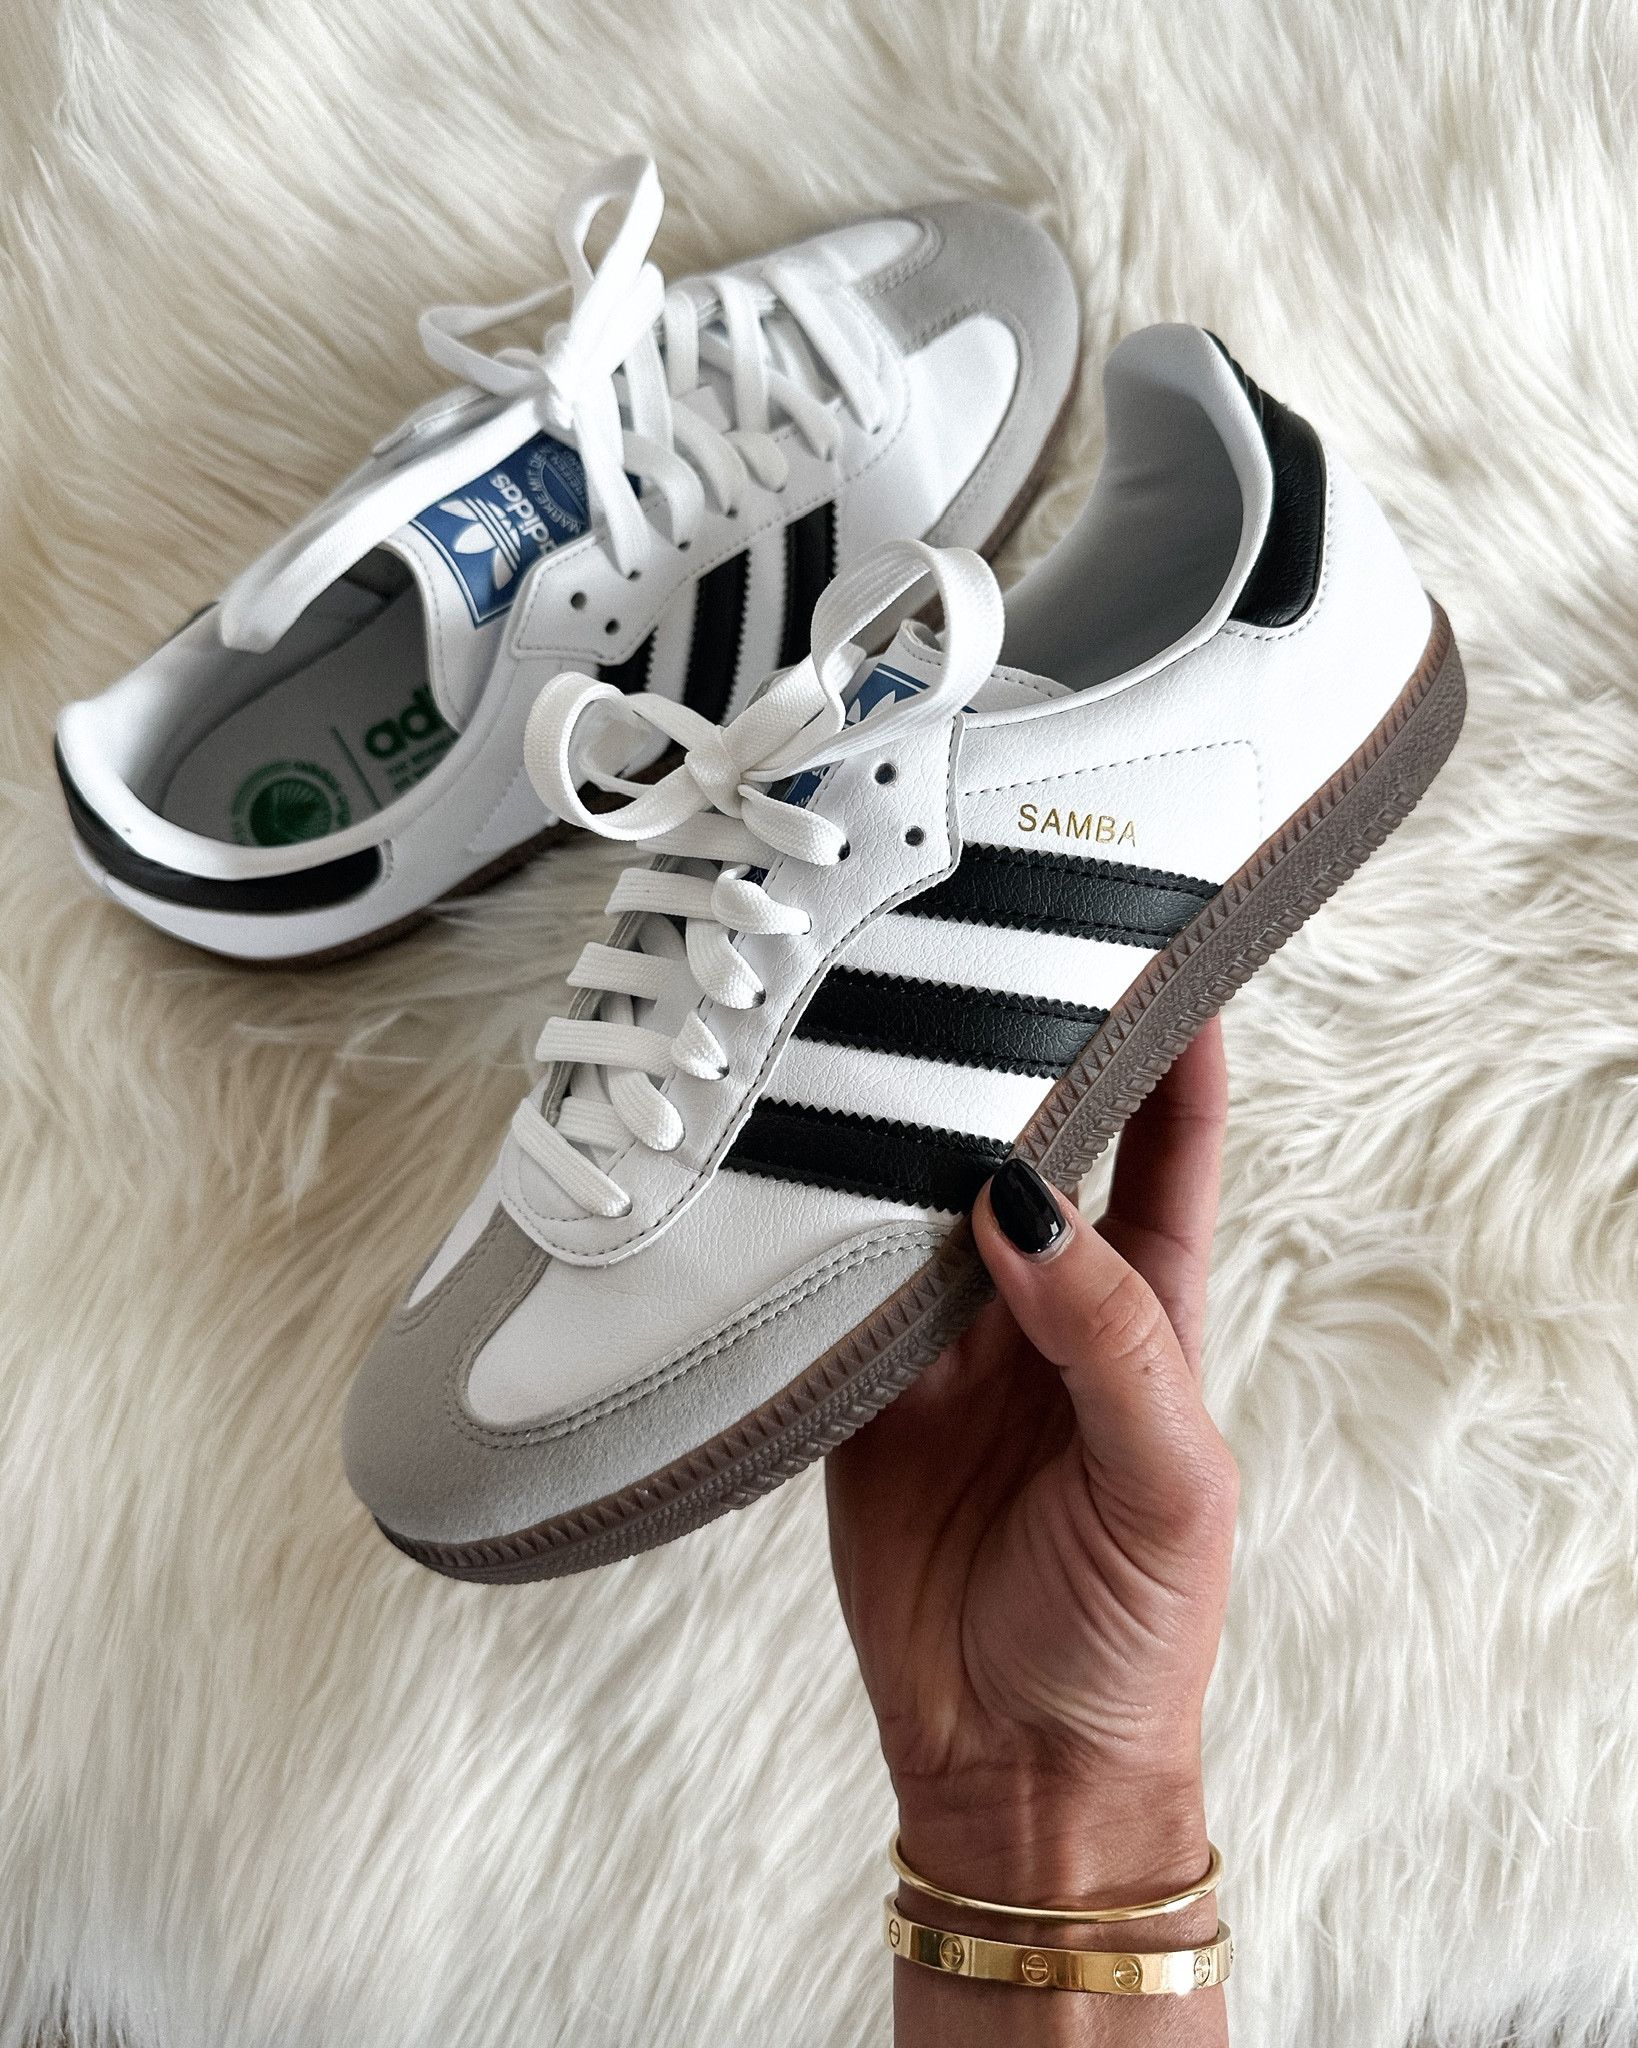 Athletic Appeal: Stepping Out in Style with Adidas Shoes